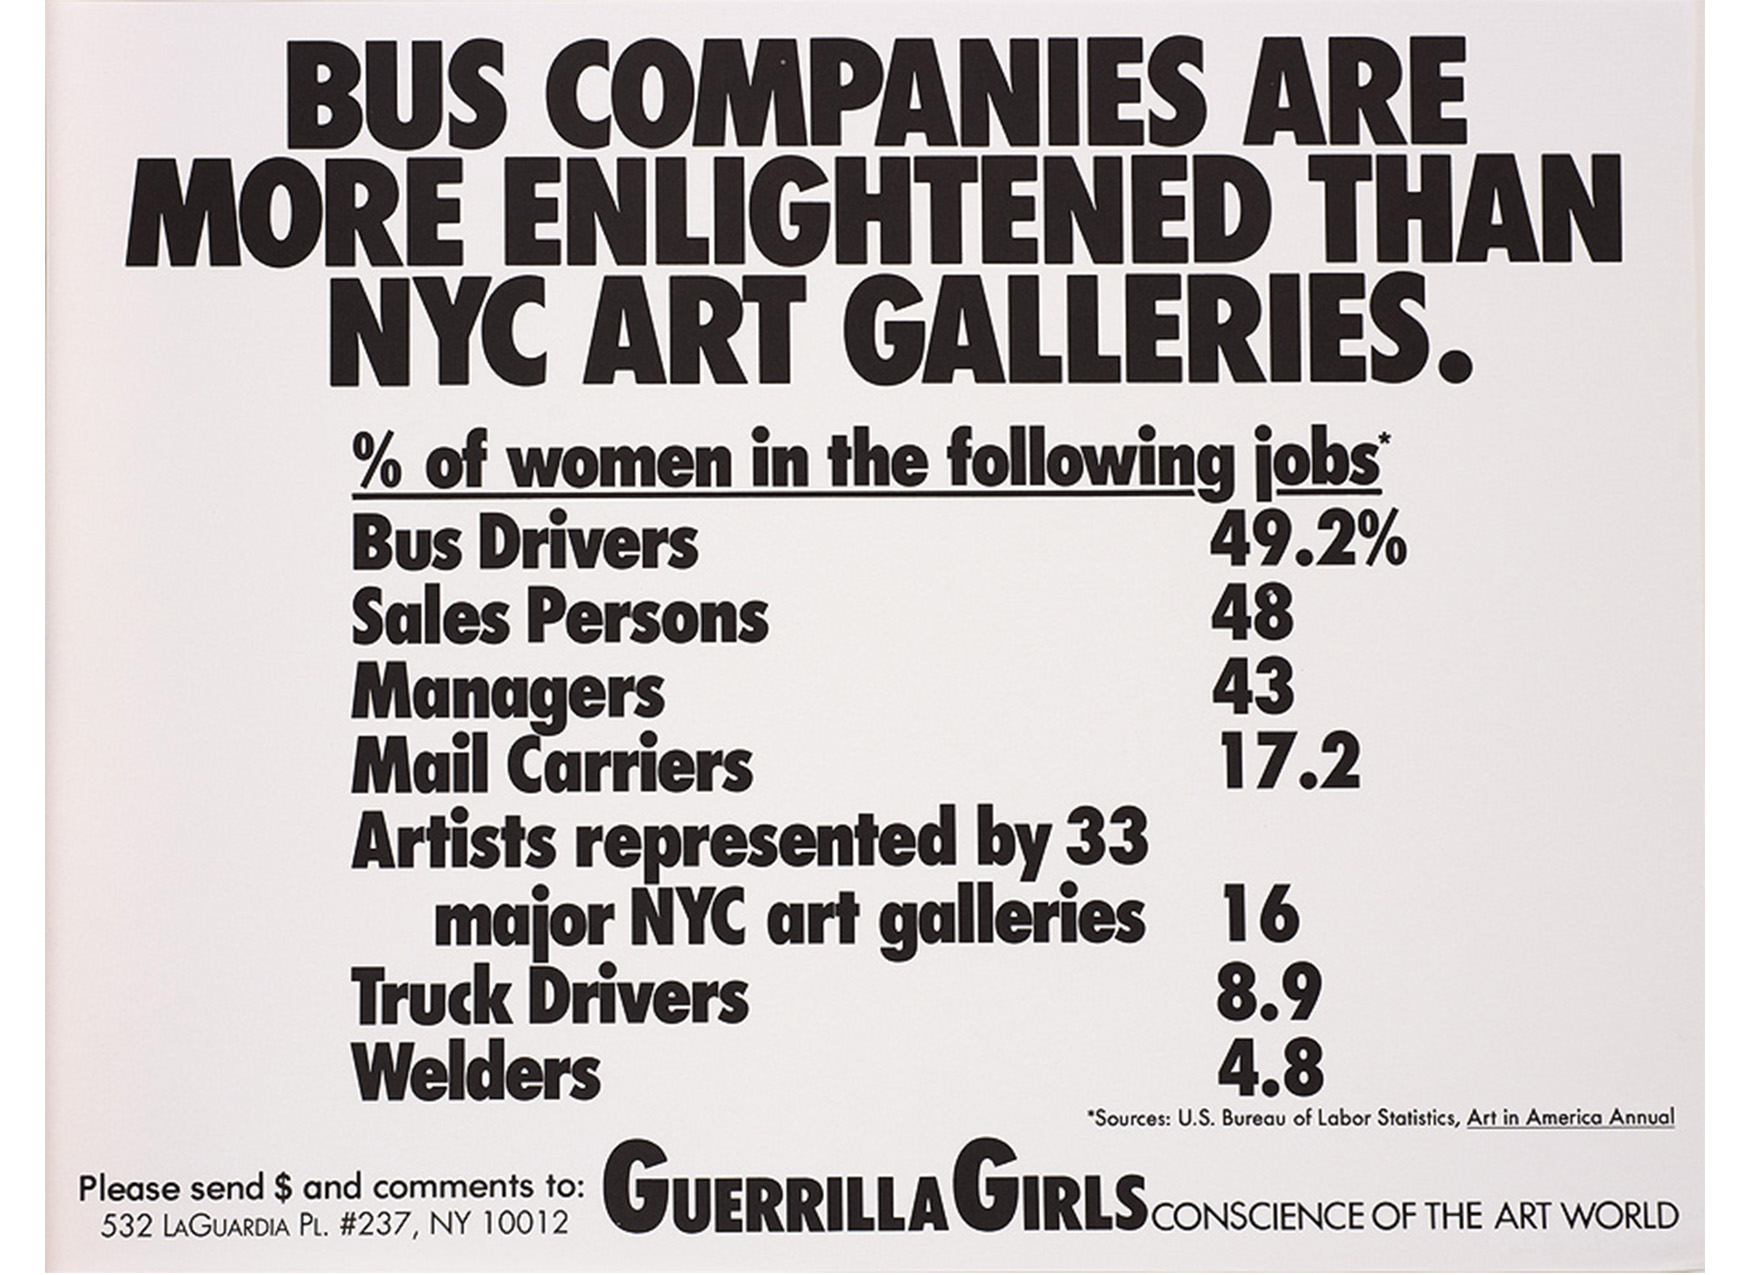 white sheet with black text: BUS COMPANIES ARE / MORE ENLIGHTENED THAN / NYC ART GALLERIES/ % of women in the following jobs* [underlined] / Bus Drivers 49.2% / Sales Persons 48 / Managers 43 / Mail Carriers 17.2 / Artists represented by 33 / major NYC art galleries 16 / Truck Drivers 8.9 / Welders 4.8 / *Sources: U.S. Bureau of Labor Statistics, Art in America Annual [underlined] / Please send $ and comments to: Guerrilla Girls CONSCIENCE OF THE ART WORLD / 532 LaGuardia Pl. #237, NY 10012